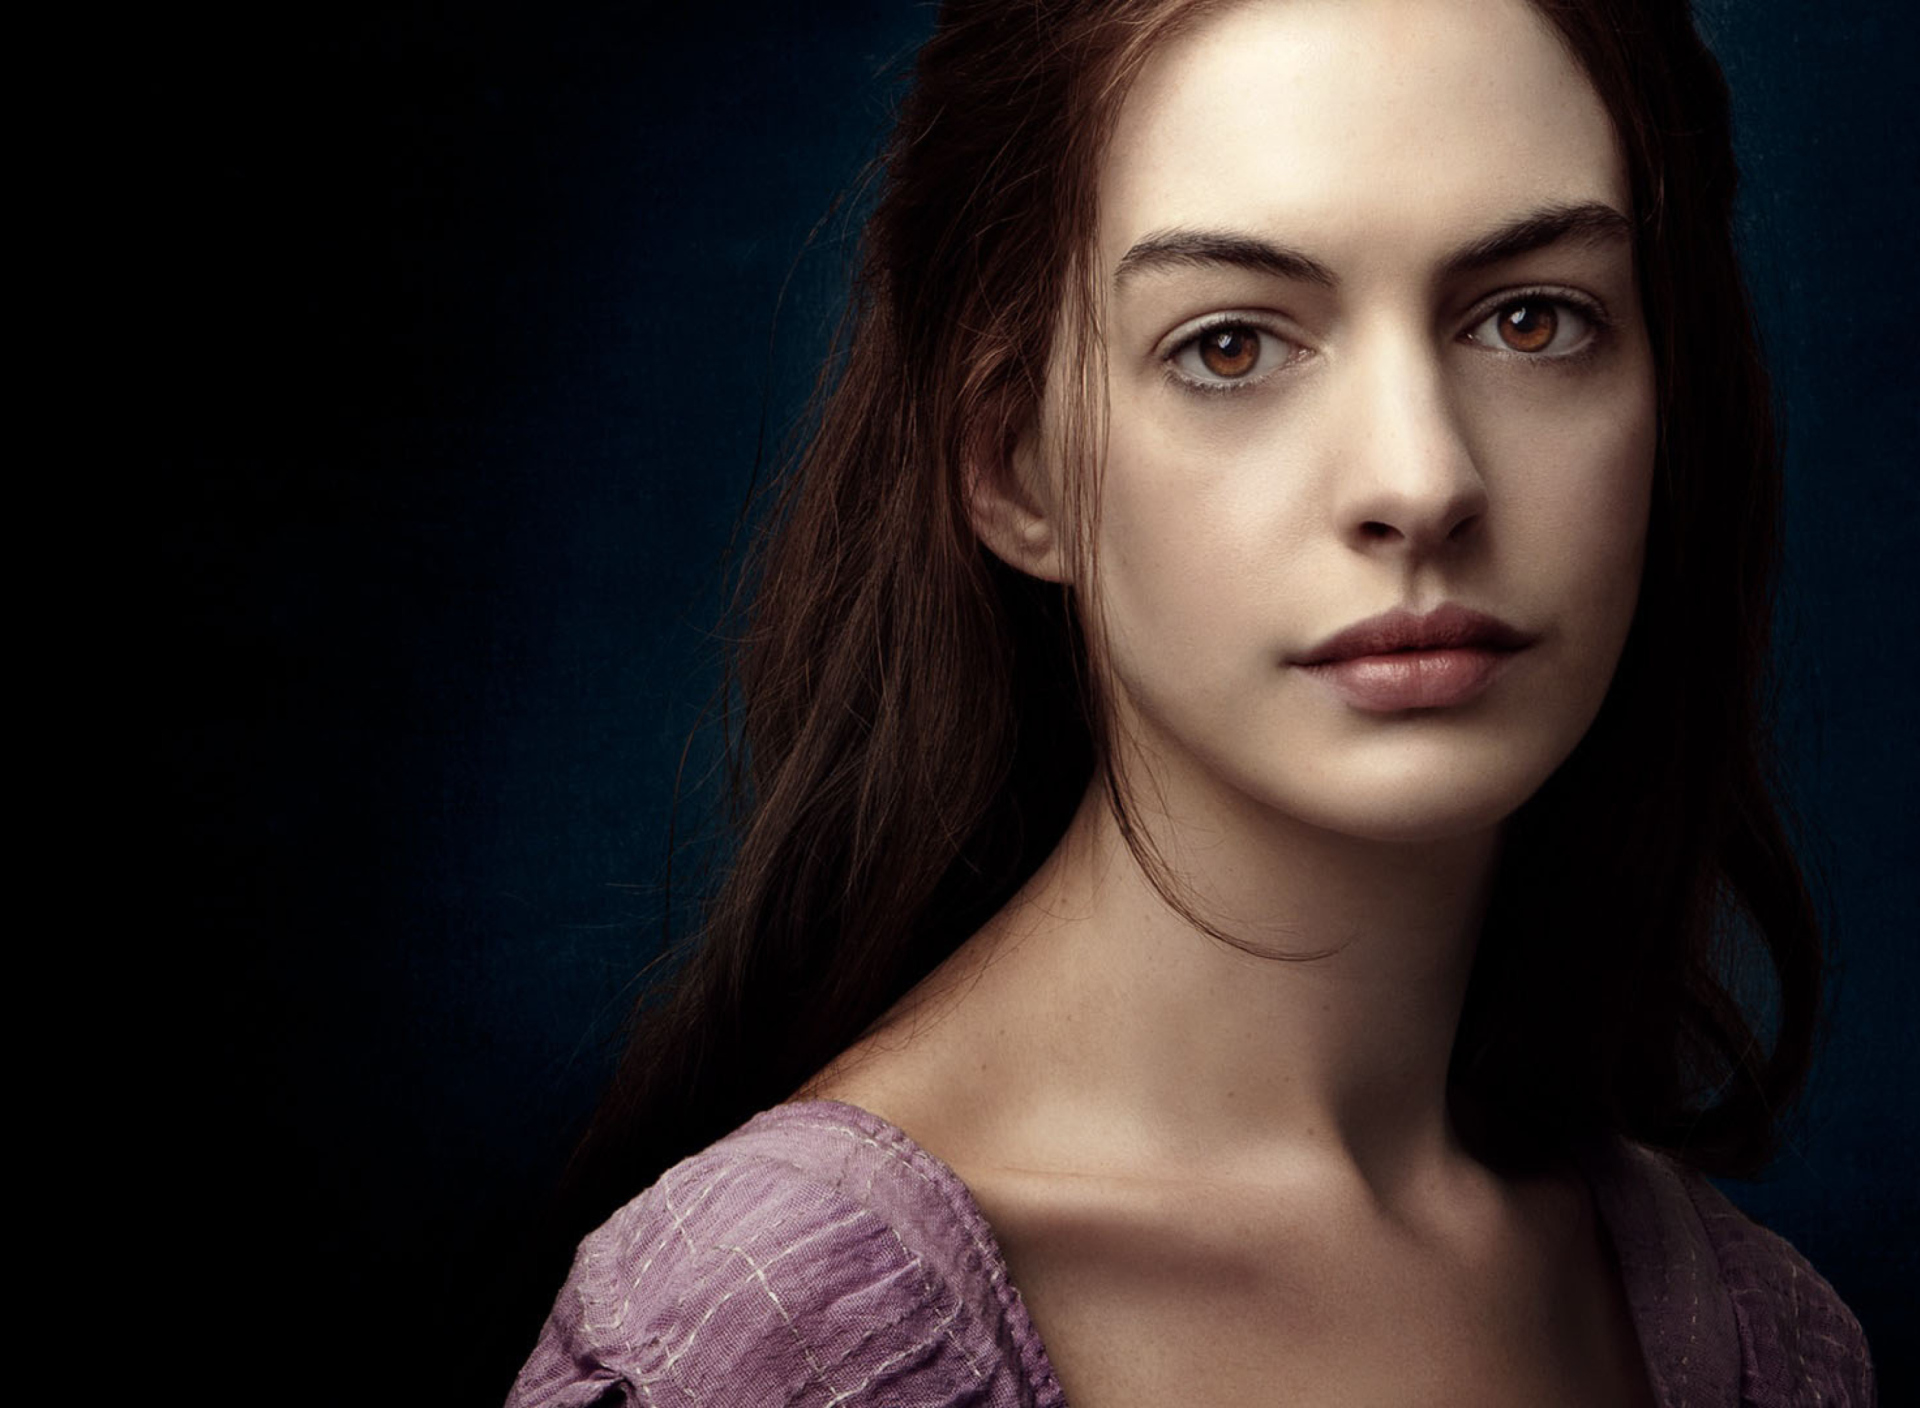 Anne Hathaway In Les Miserables screenshot #1 1920x1408